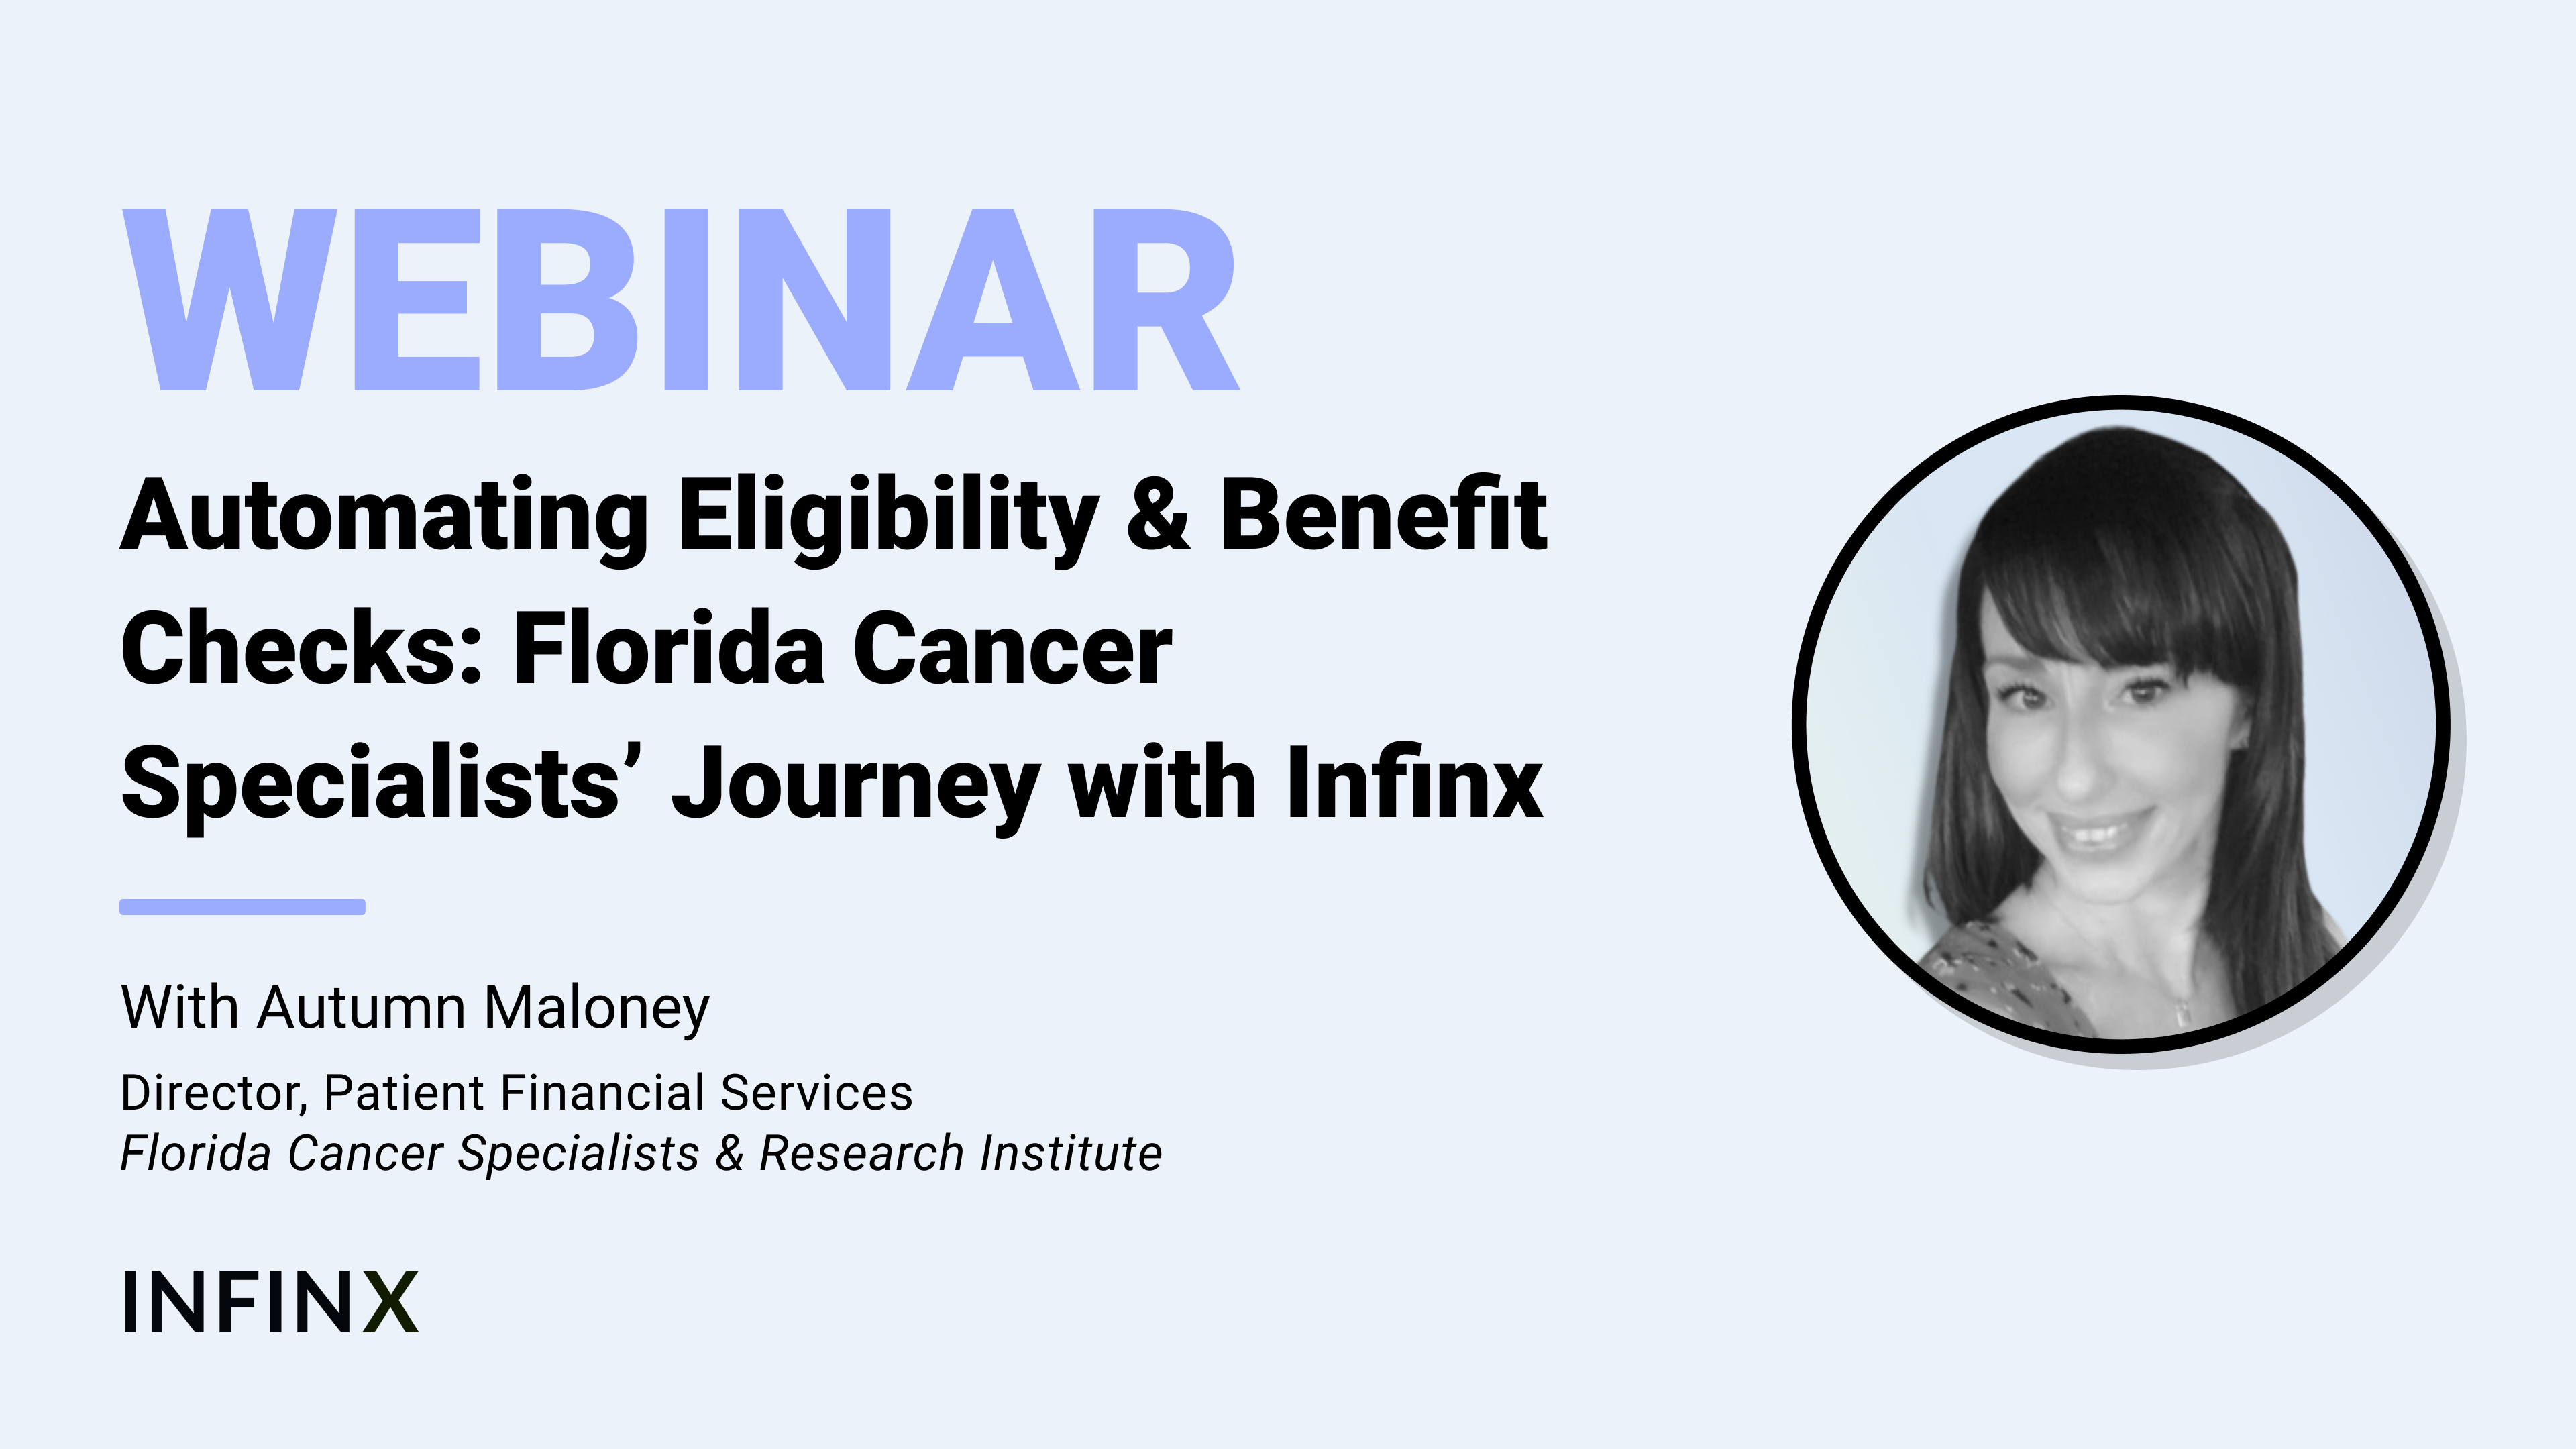 Automating Eligibility & Benefit Checks Florida Cancer Specialists’ Journey with Infinx With Florida Cancer Specialists & Research Institute Director Patient Financial Services Autumn Maloney Infinx Office Hours Revenue Cycle Optimized